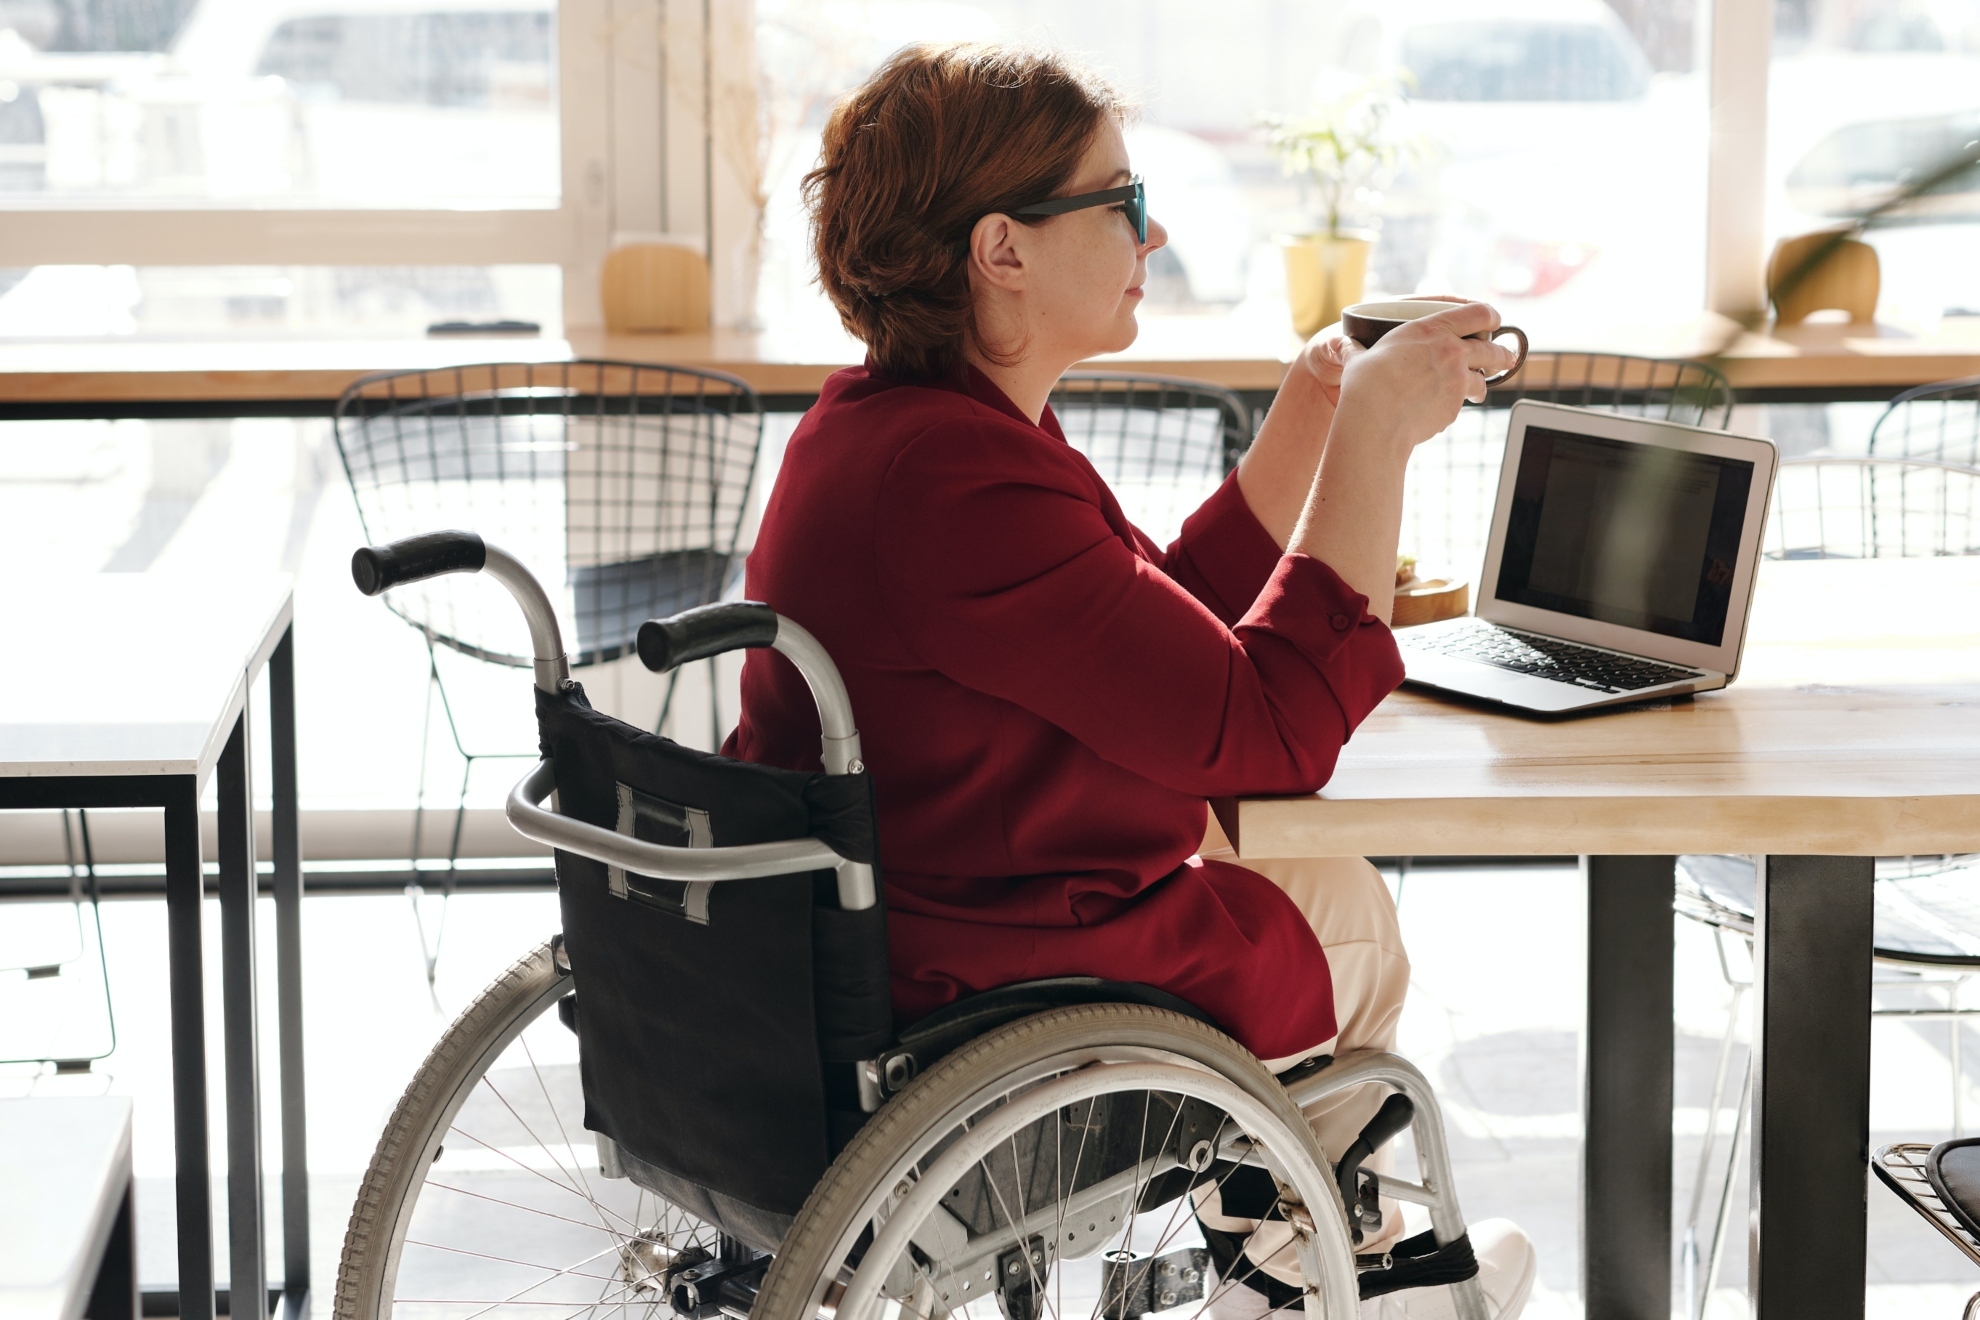 SSDI can be taxed but it depends on several factors